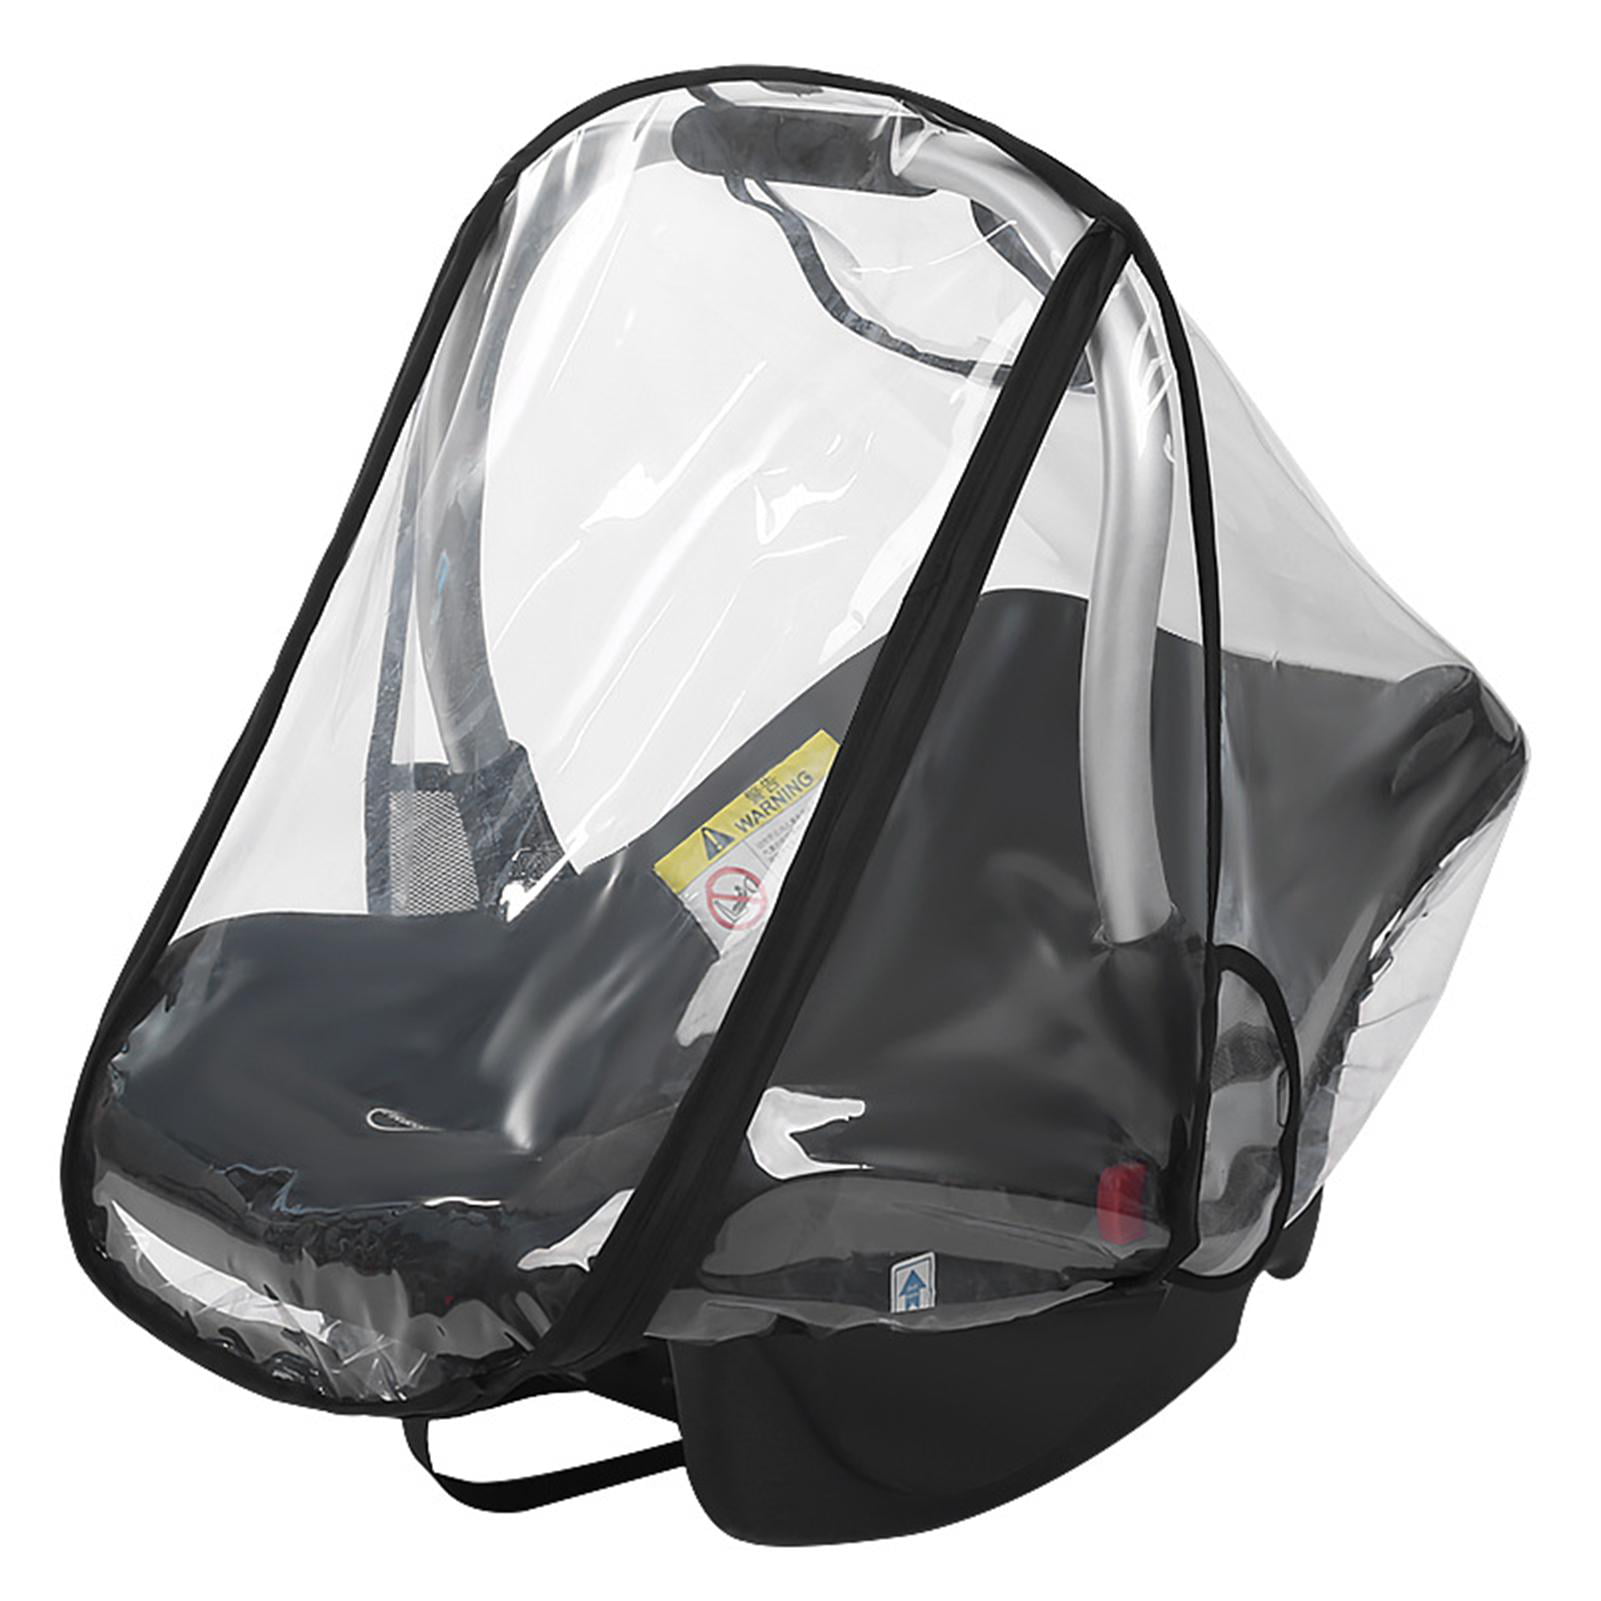 Raincover storage Bag UNIVERSAL For Seat And Carrycot 